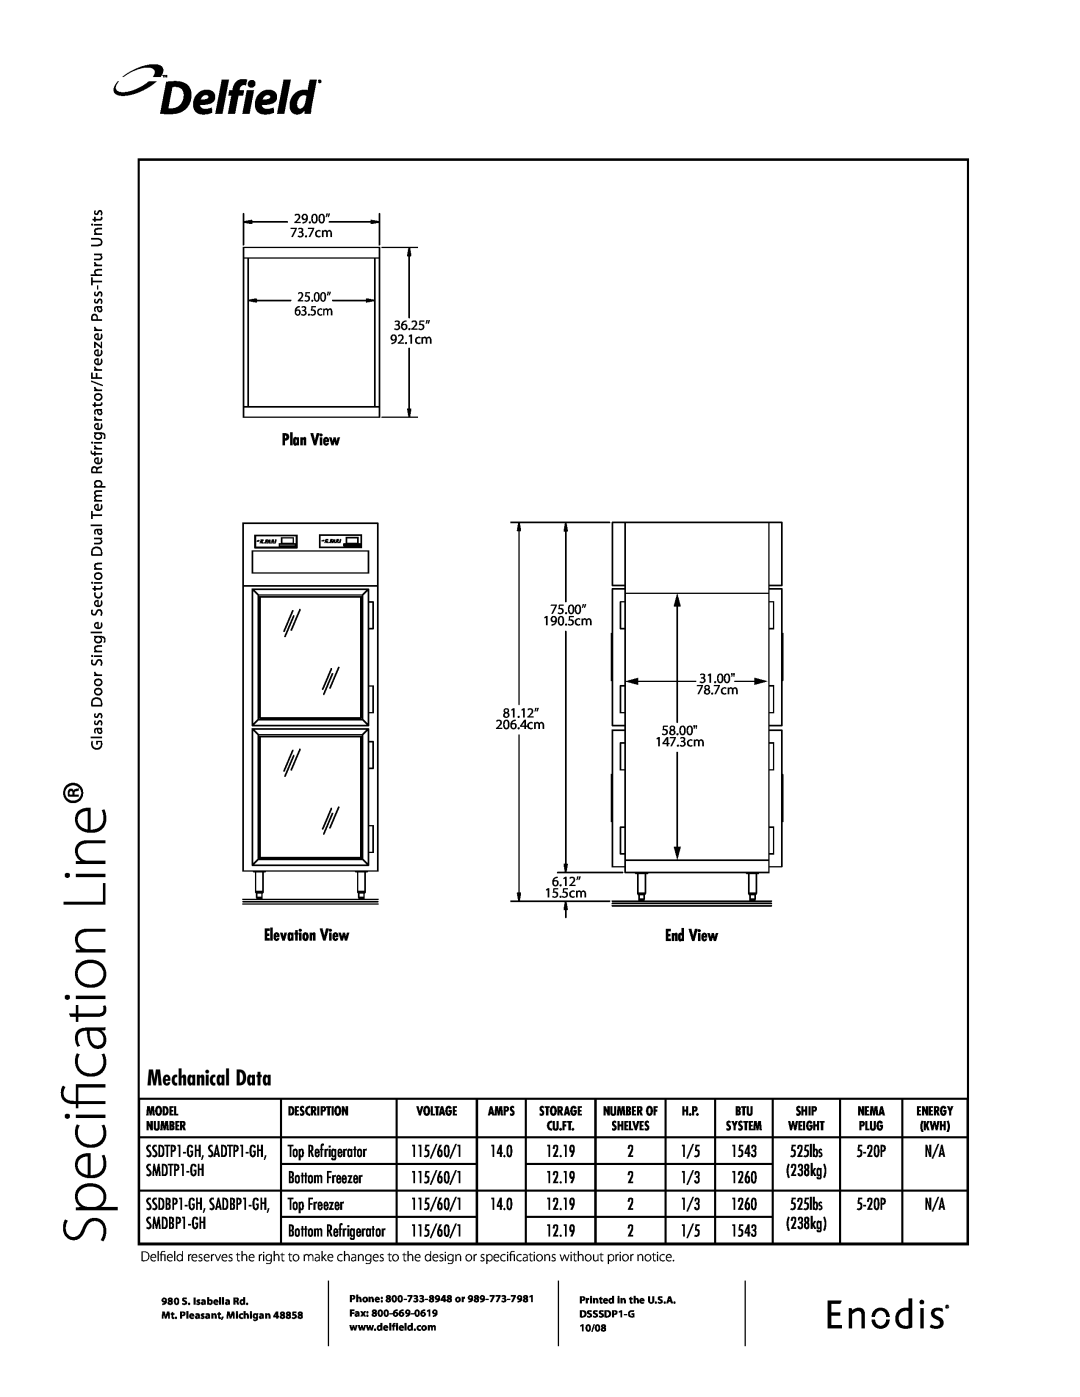 Delfield SMDTP1-GH, SSDBP1-GH, SSDTP1-GH Specification, Delfield, Mechanical Data, Plan View Elevation View, End View 